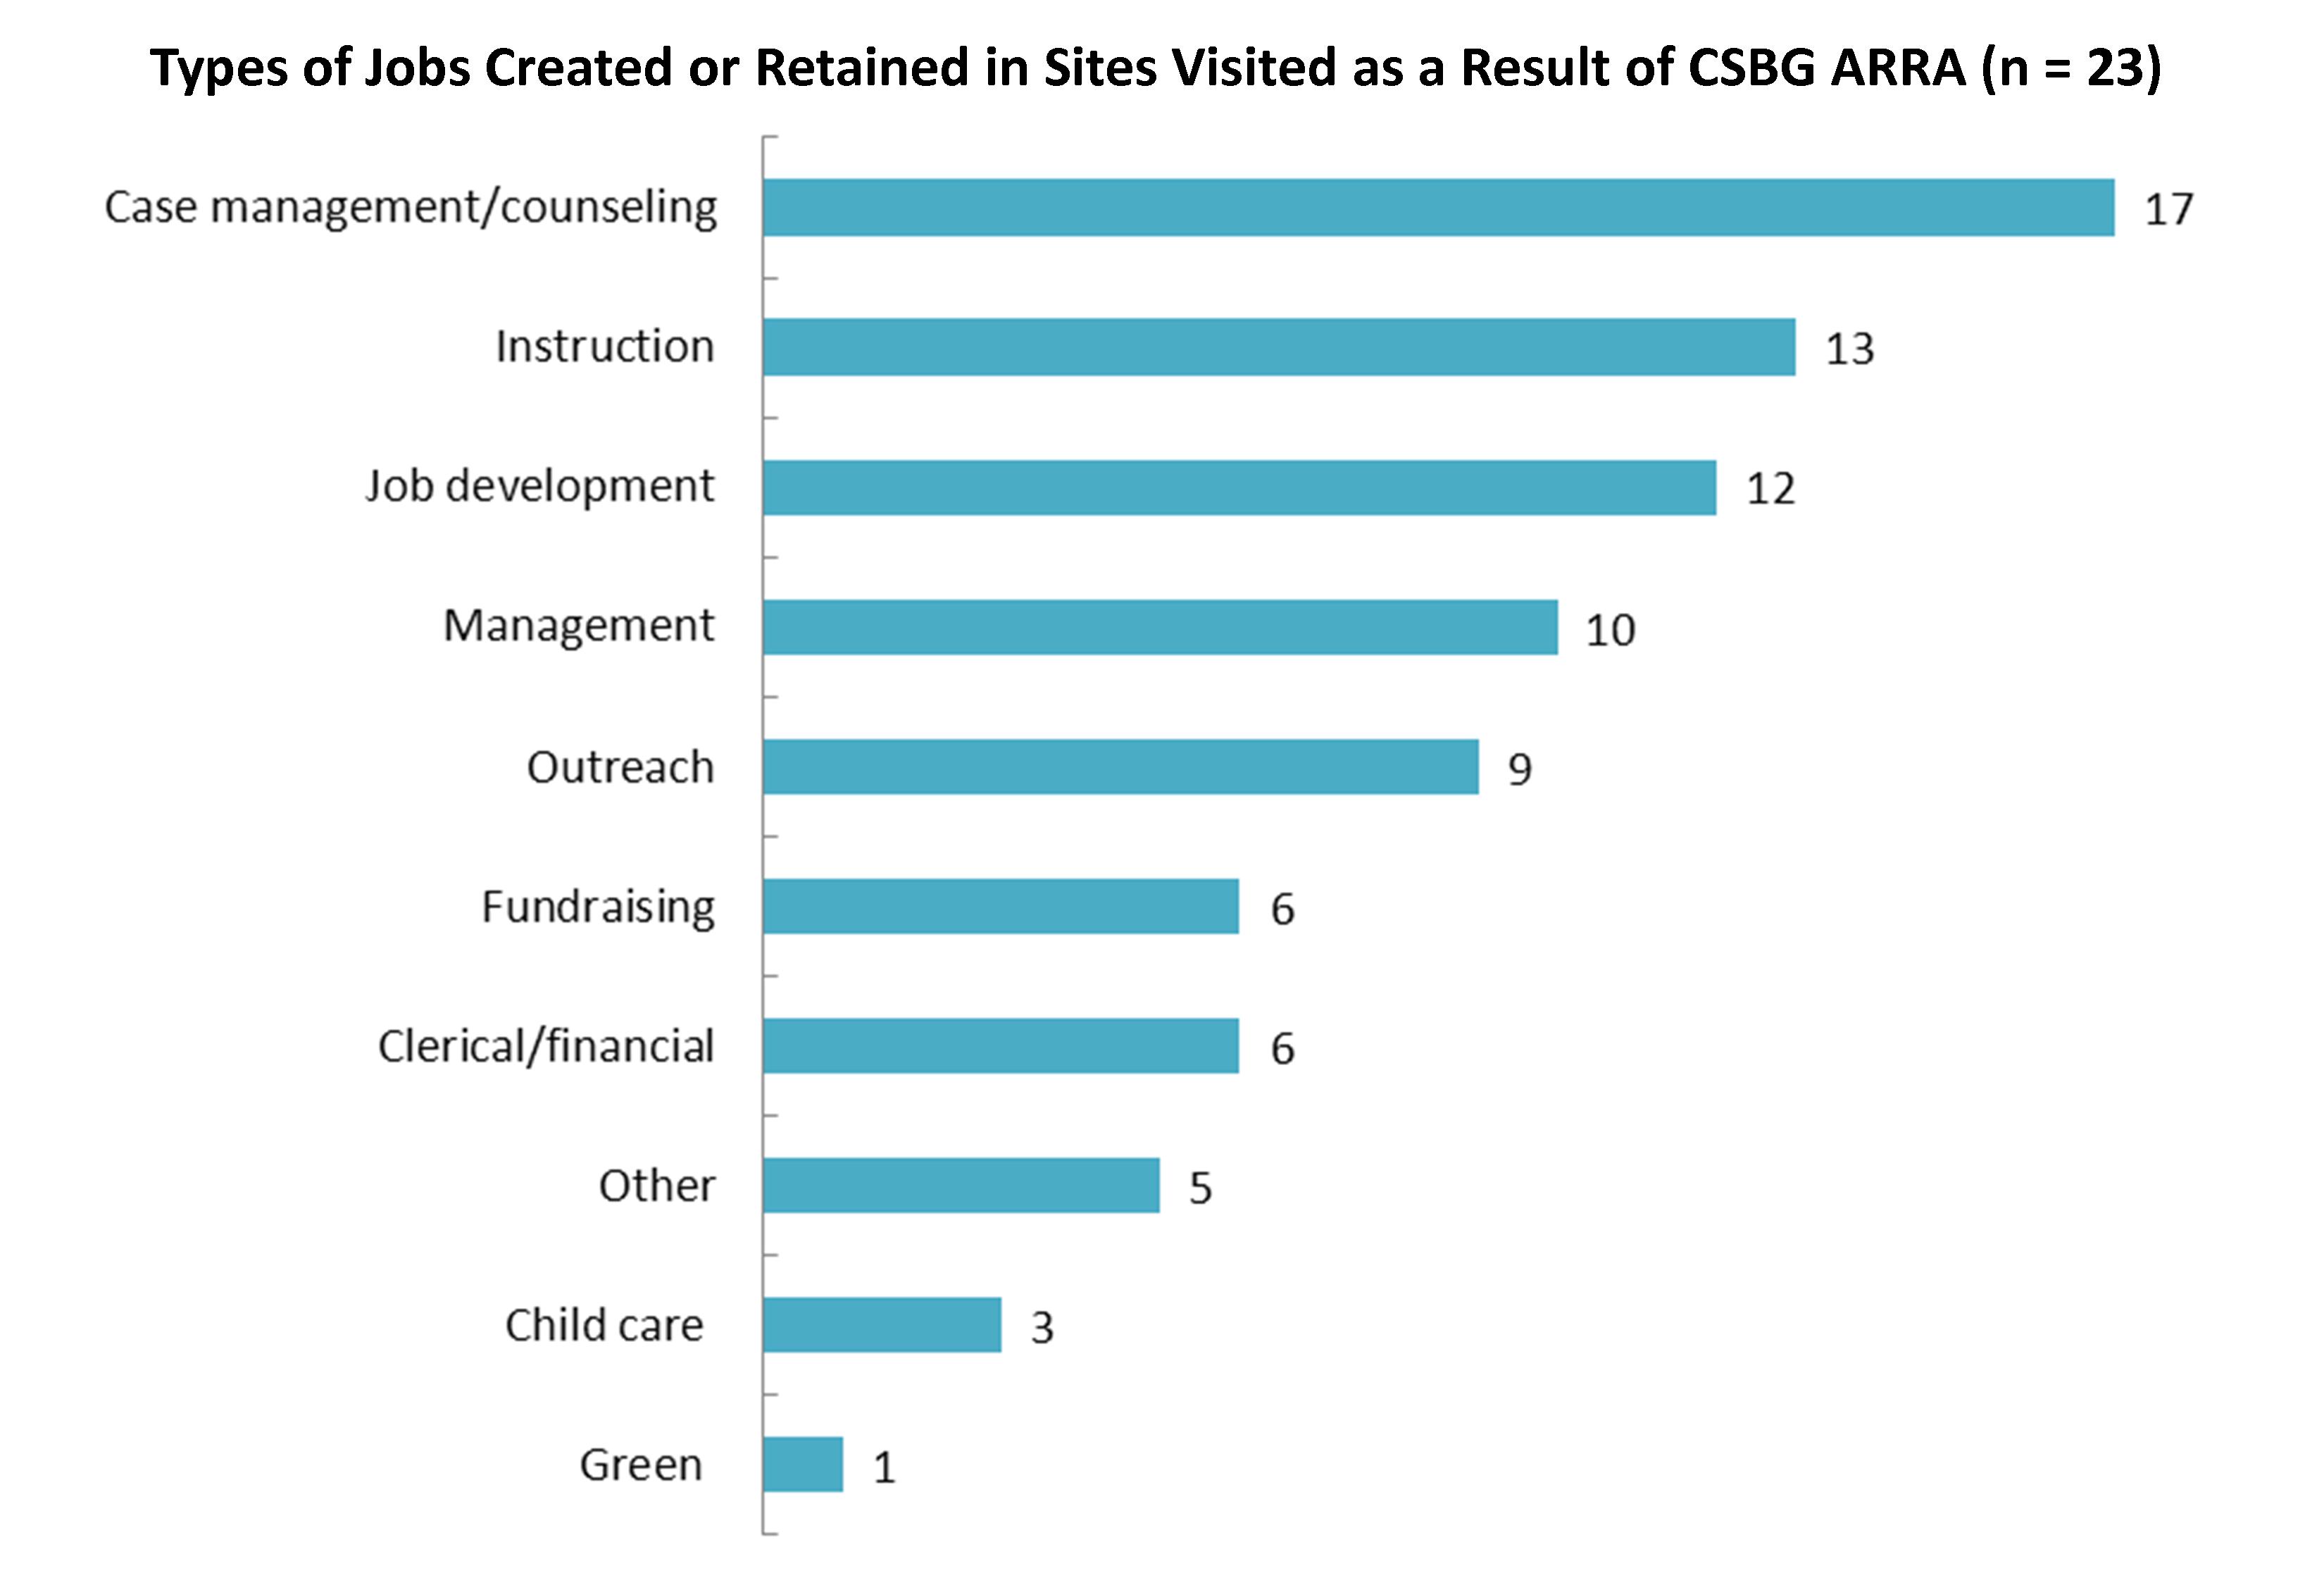 Types of Jobs Created or Retained in Sites Visited as a Result of CSBG ARRA (n = 23)